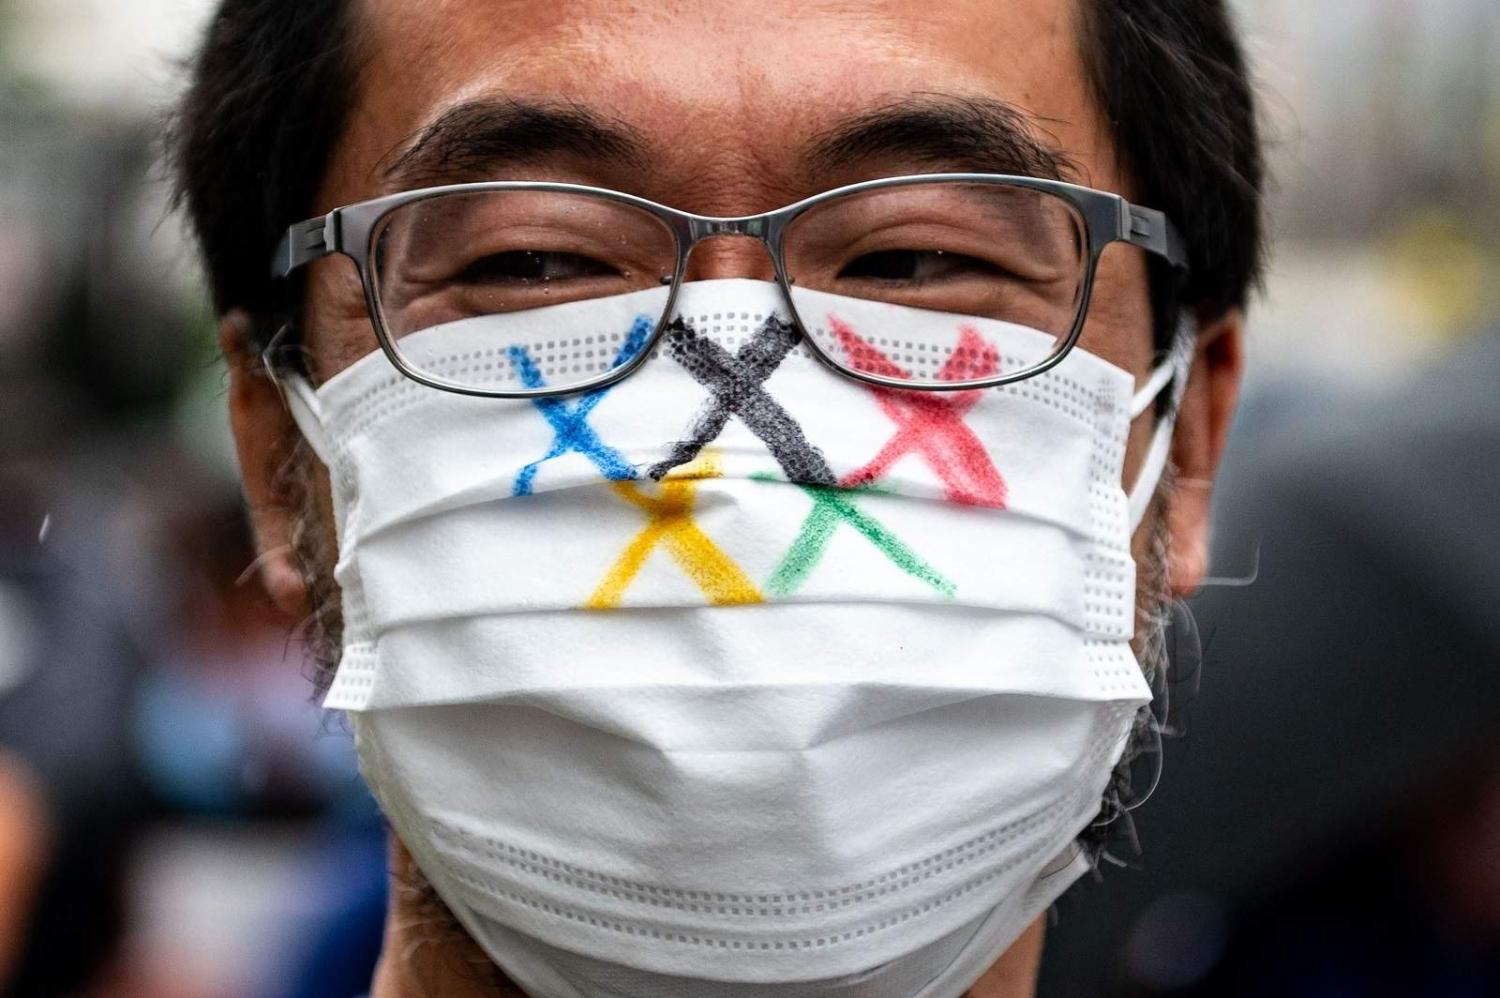 An activist marches to Tokyo's Metropolitan Government Building to protest against the Tokyo Olympics, 19 June 2021 (Philip Fong/AFP via Getty Images)